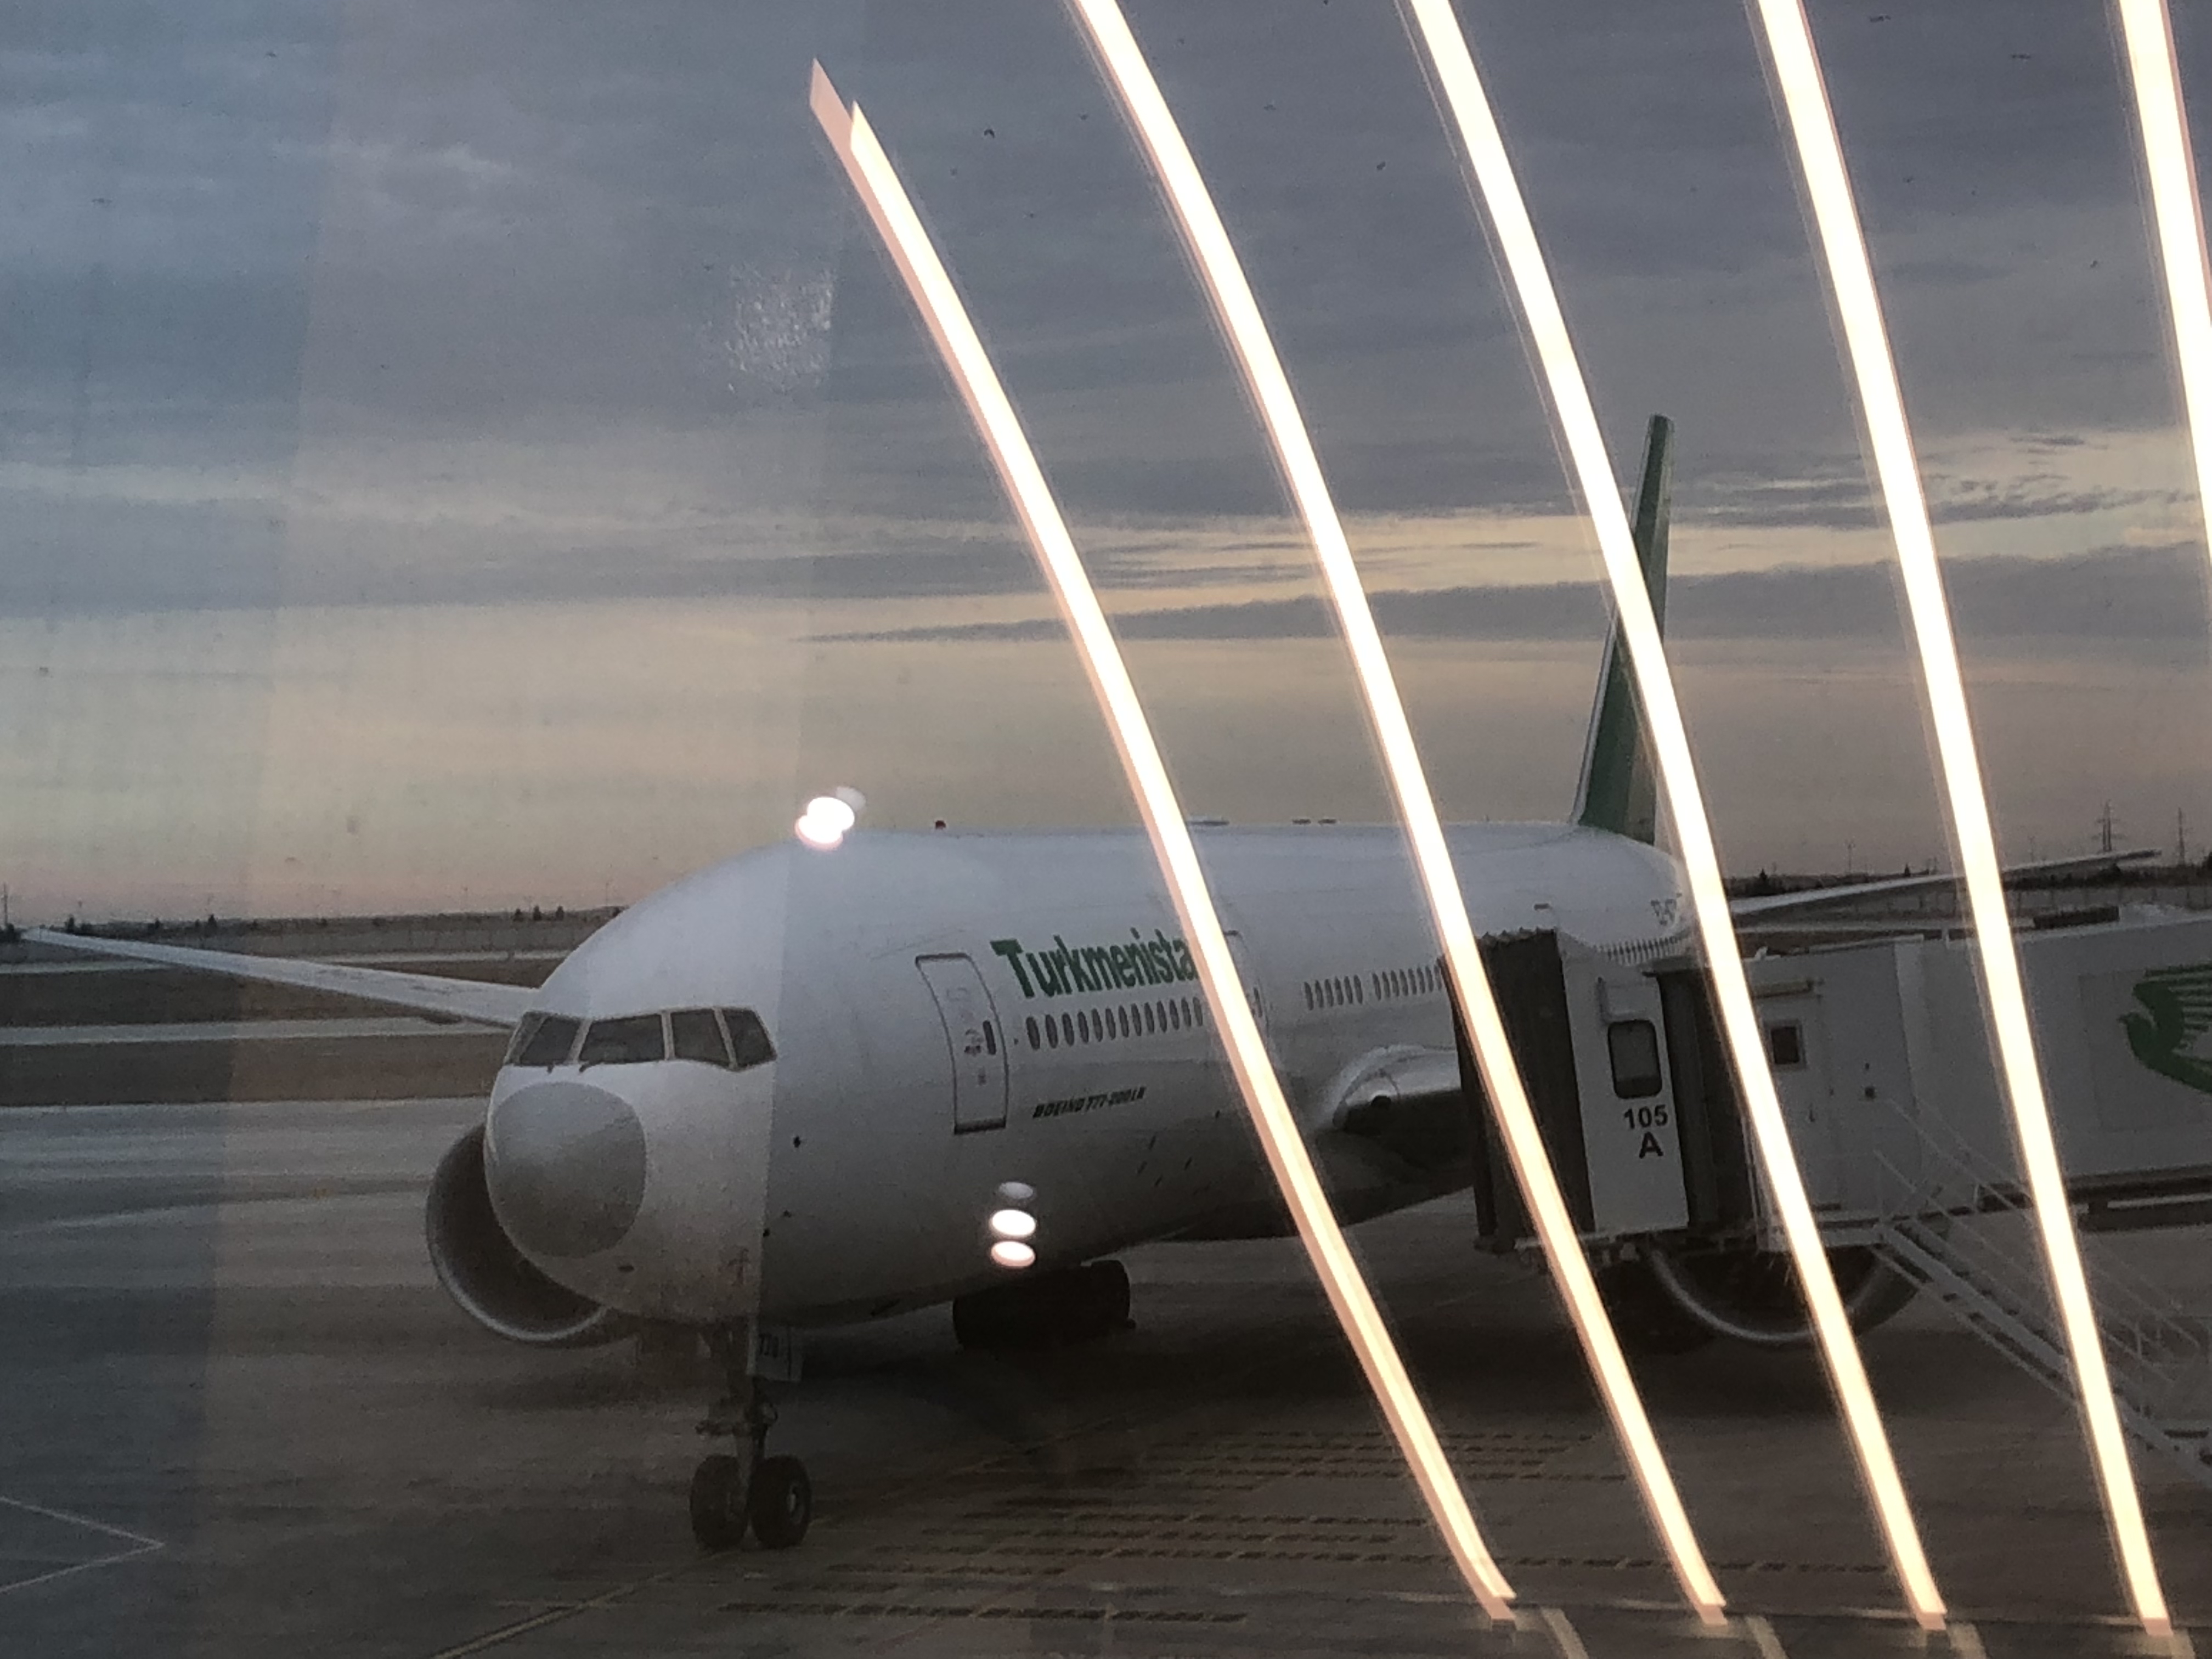 Turkmenistan Air, 777, Image by Sanjay Sharma | Point Me To The Plane